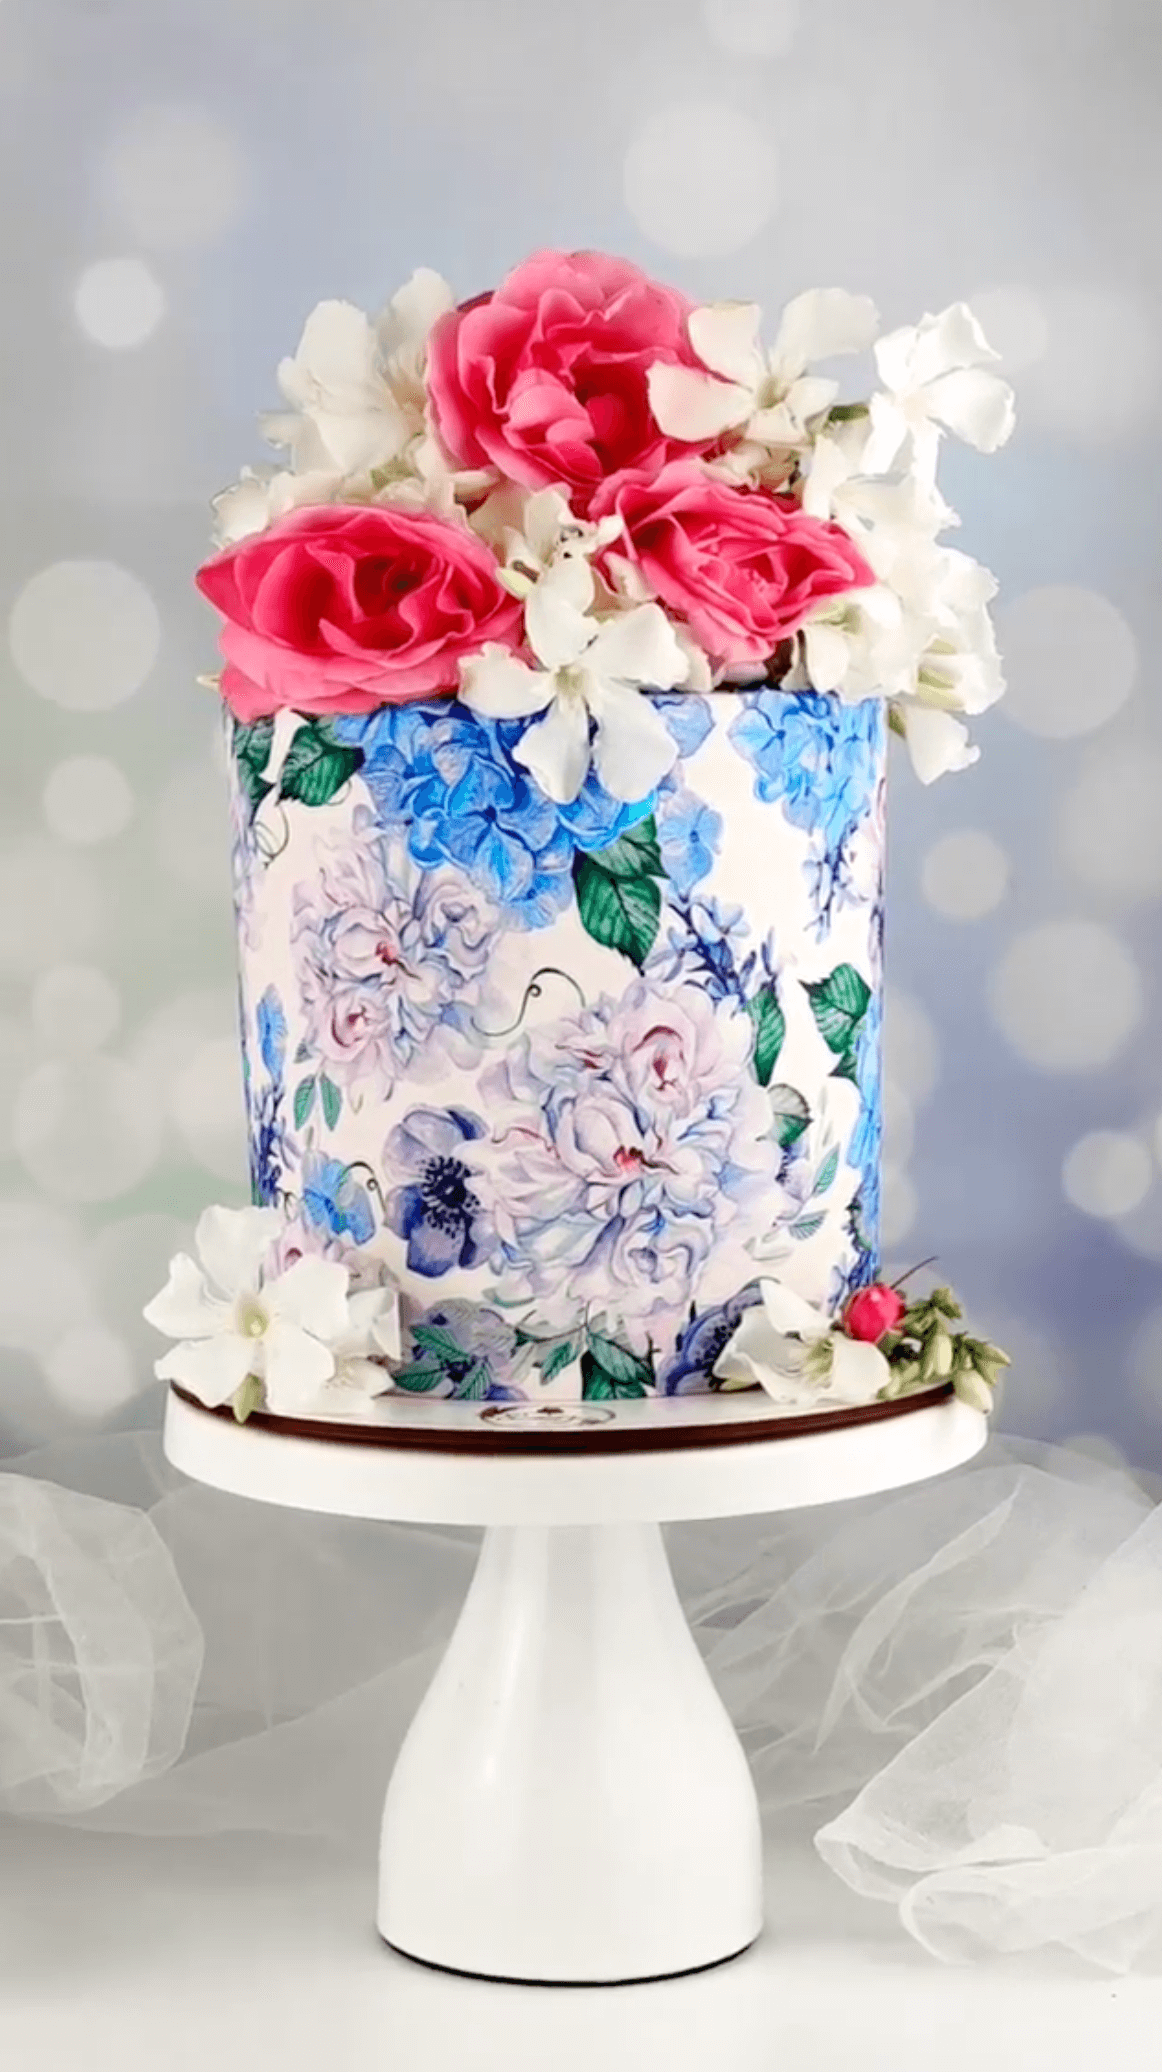 LIVE! Best way to cover your cakes with super stable ganache and icing sheets by @sweetsbyjoana